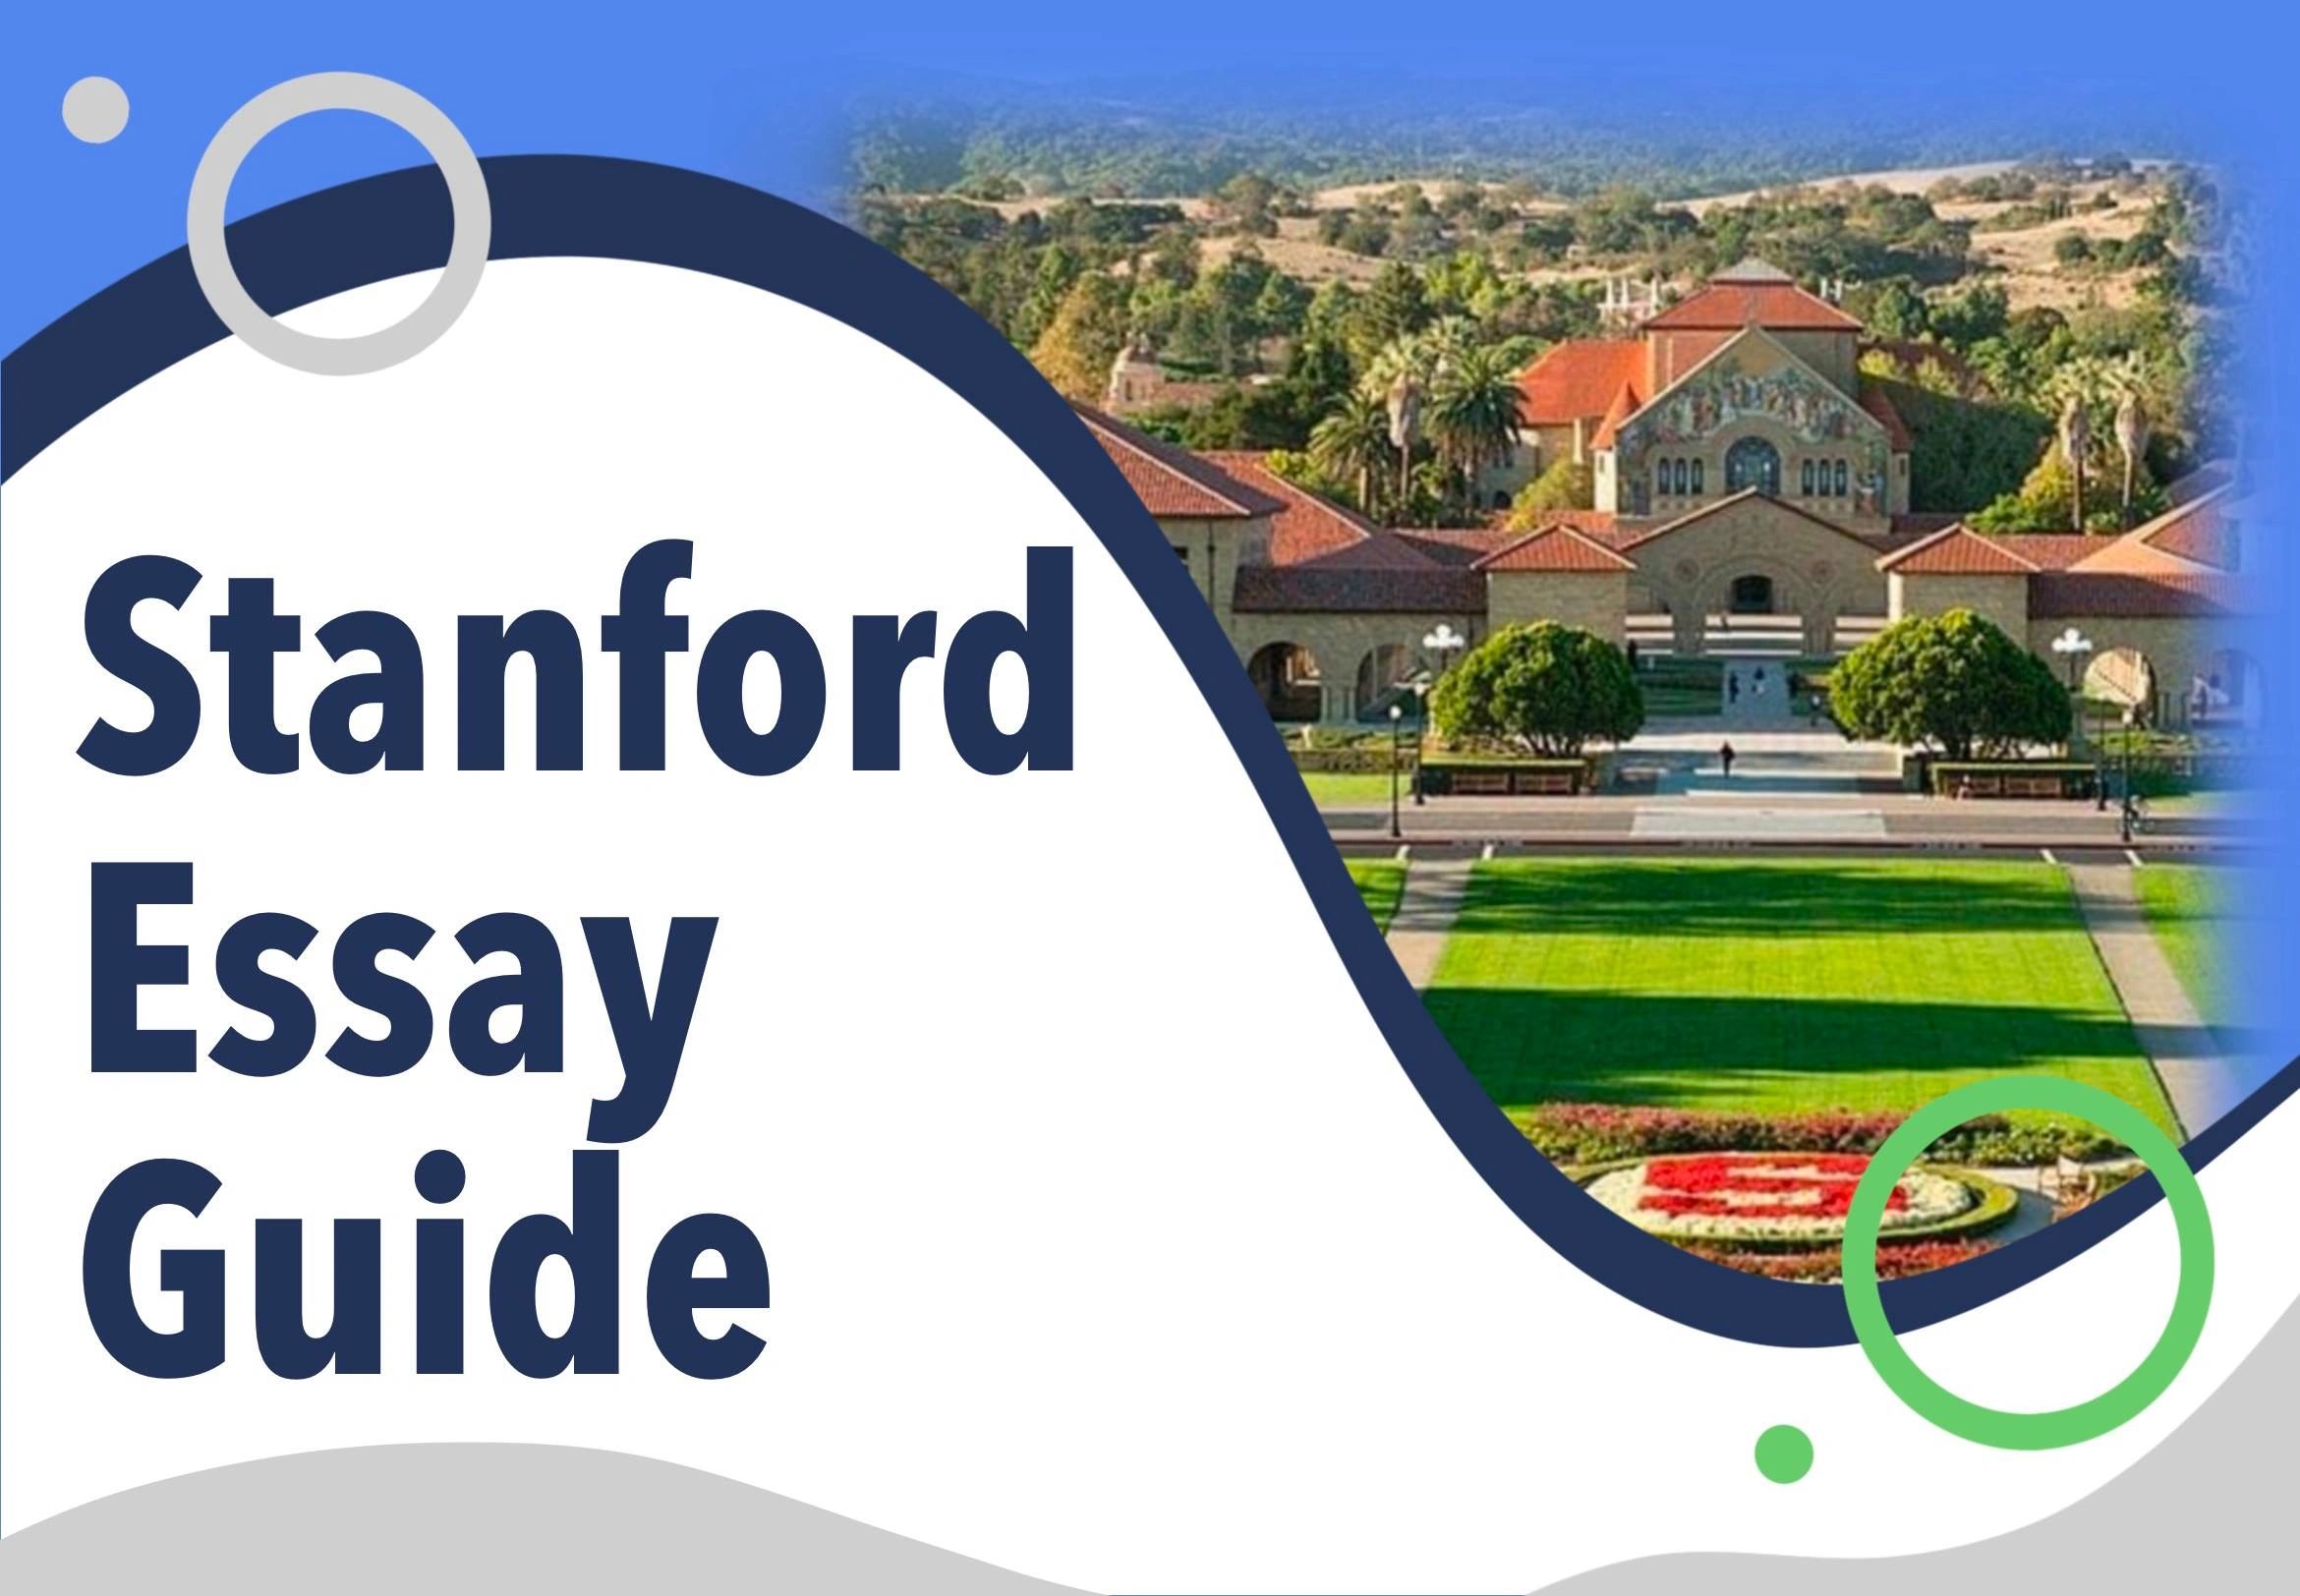 Stanford Essay Guide